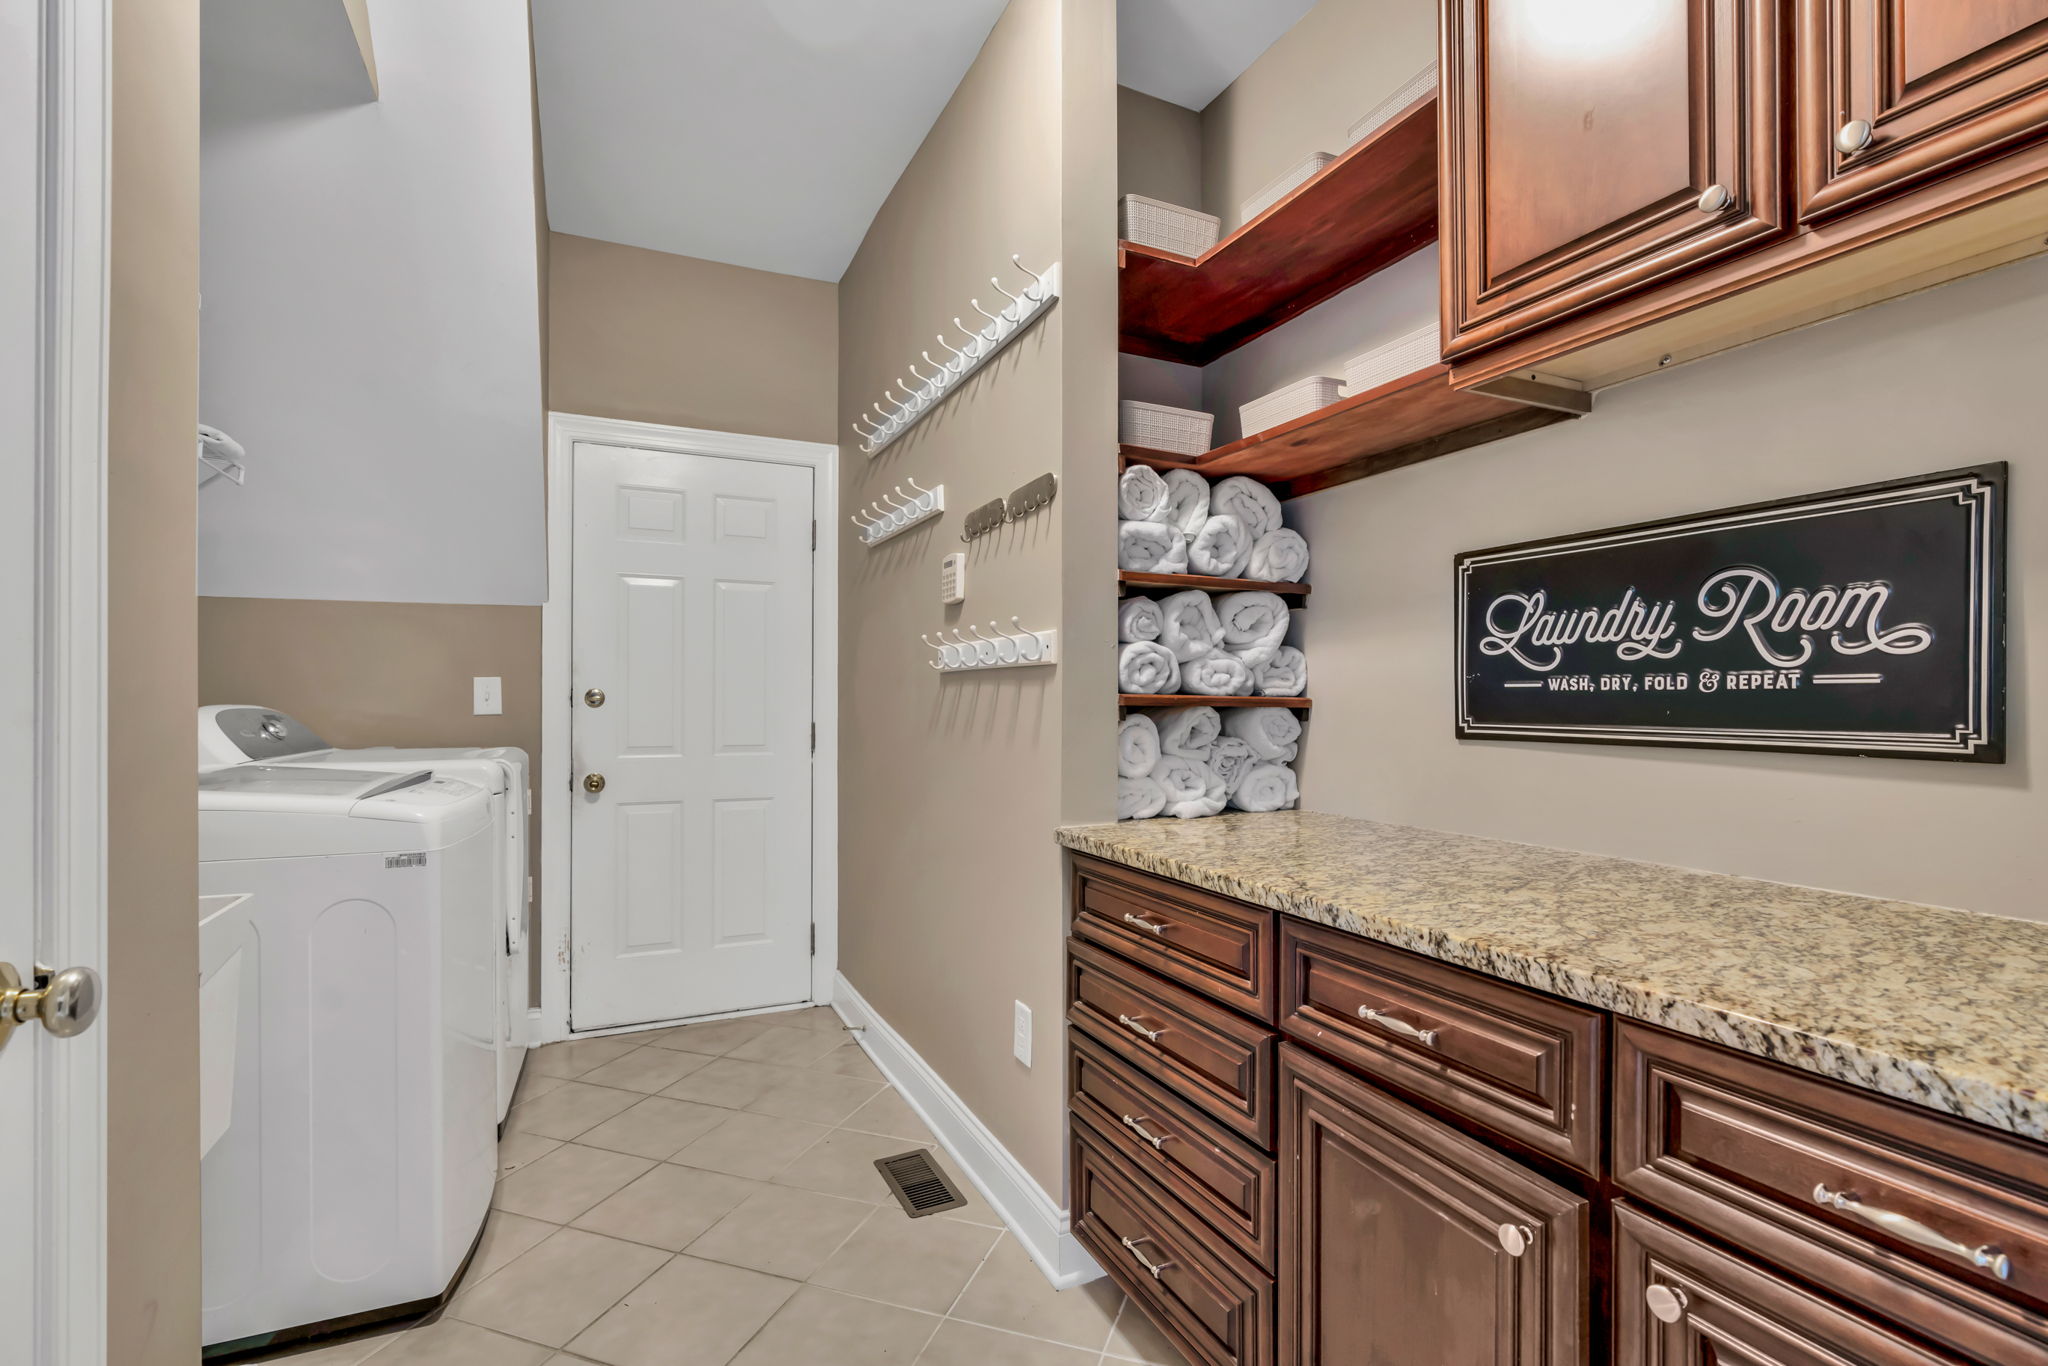 Large laundry room and mud room with built-in cabinets, shelves, tub sink and granite countertop.